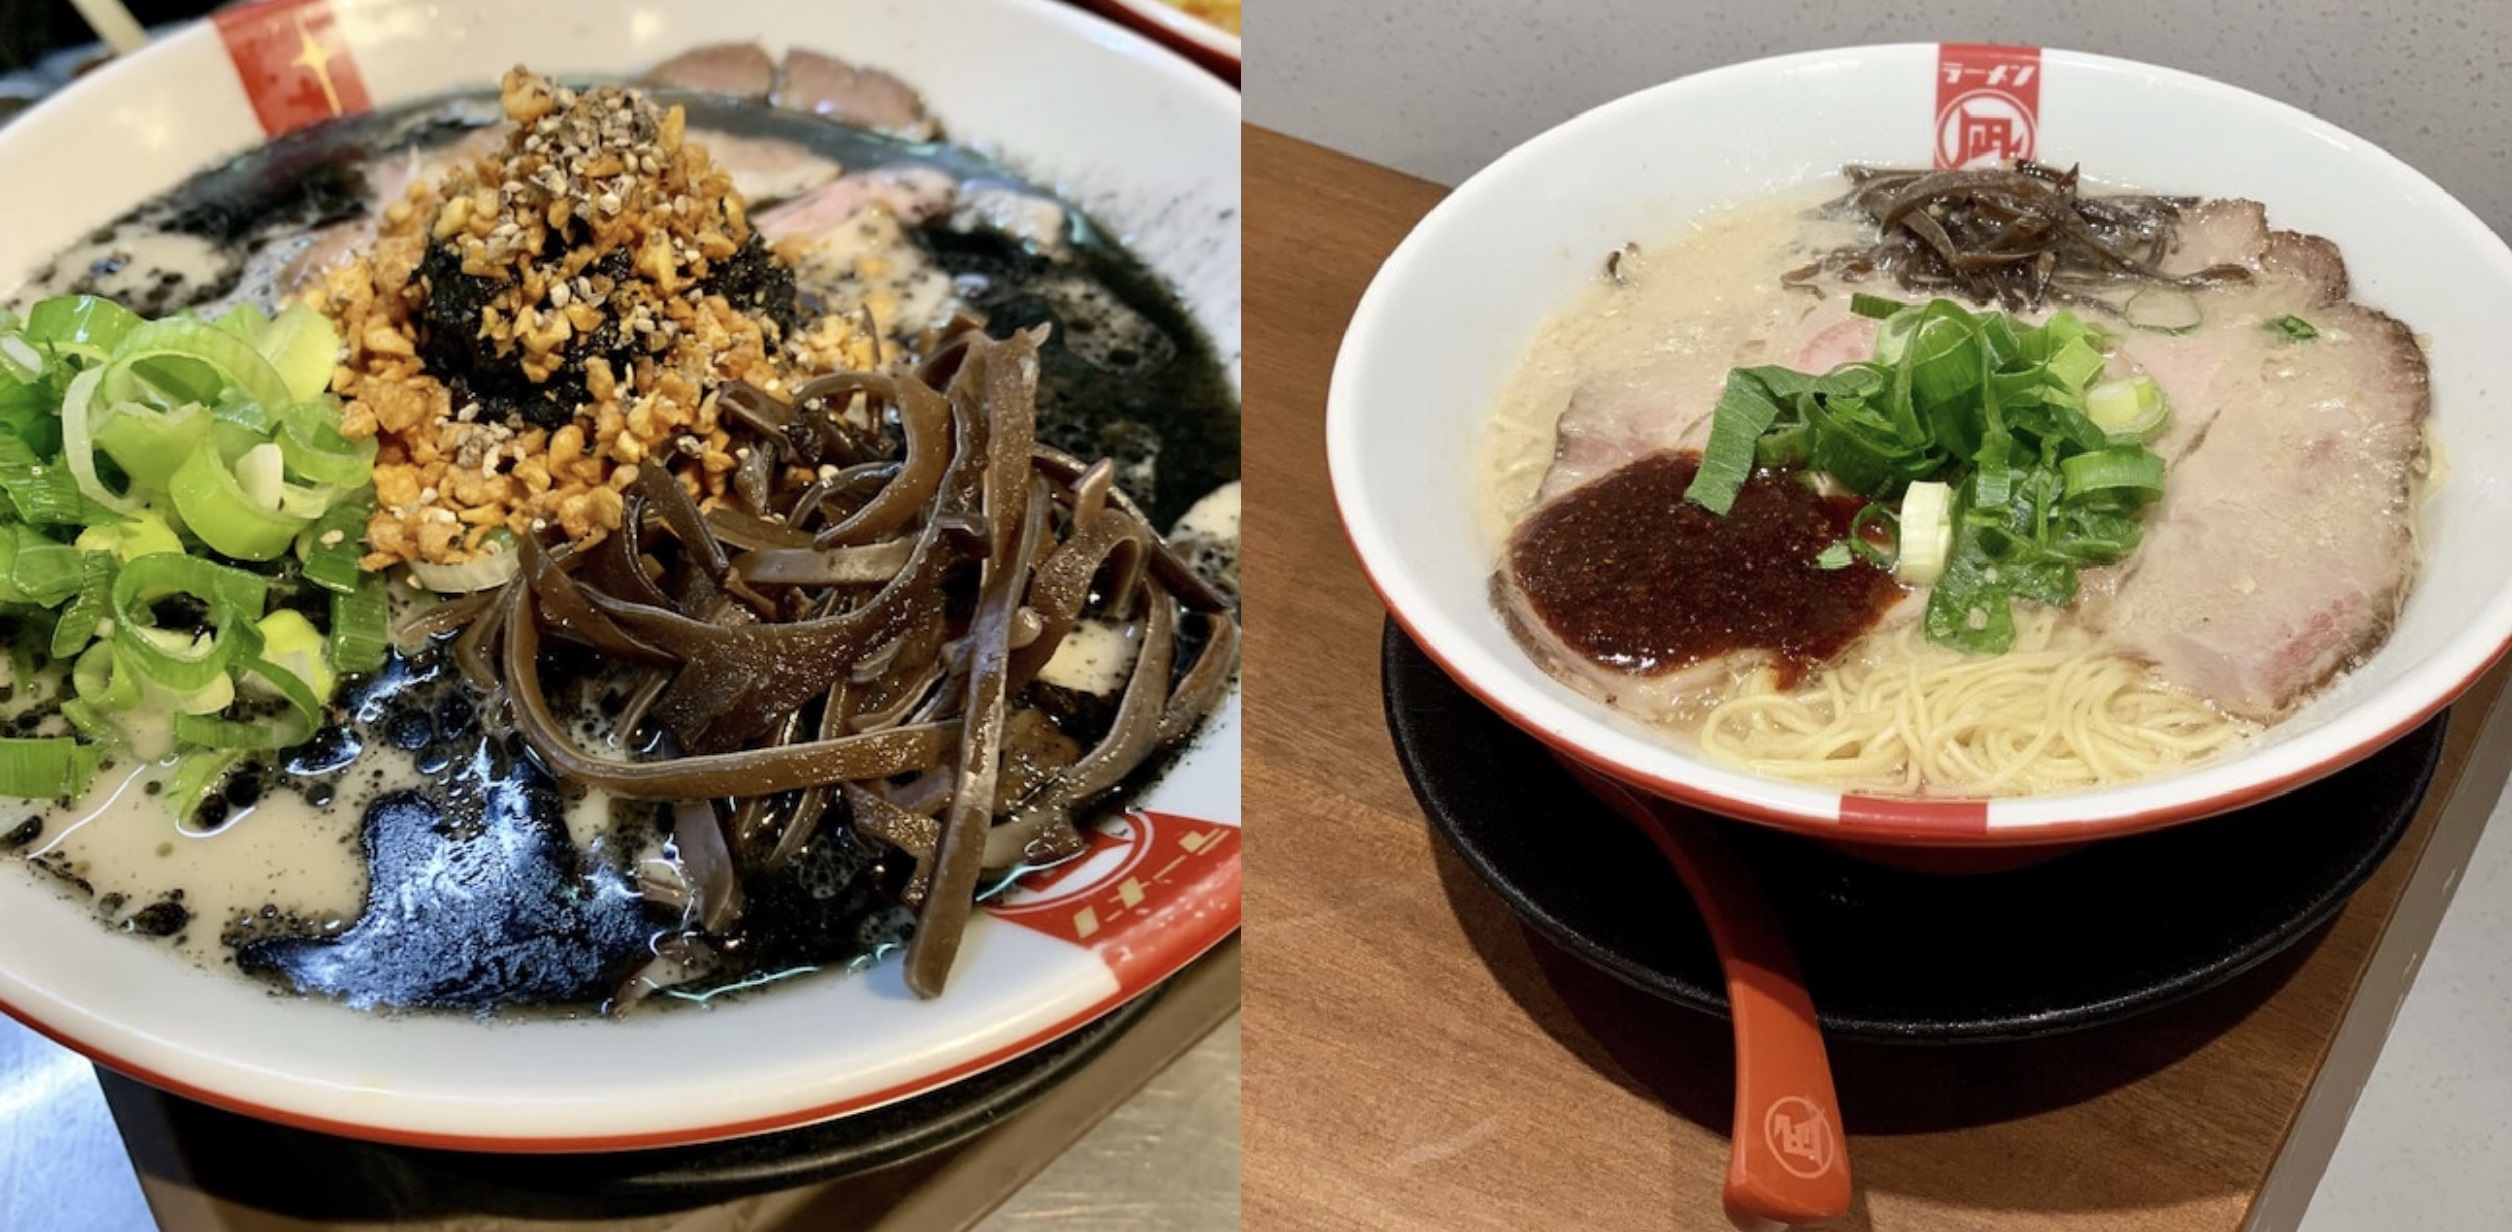 Get 2 bowls of Ramen for just P598 from Ramen Nagi on this special day